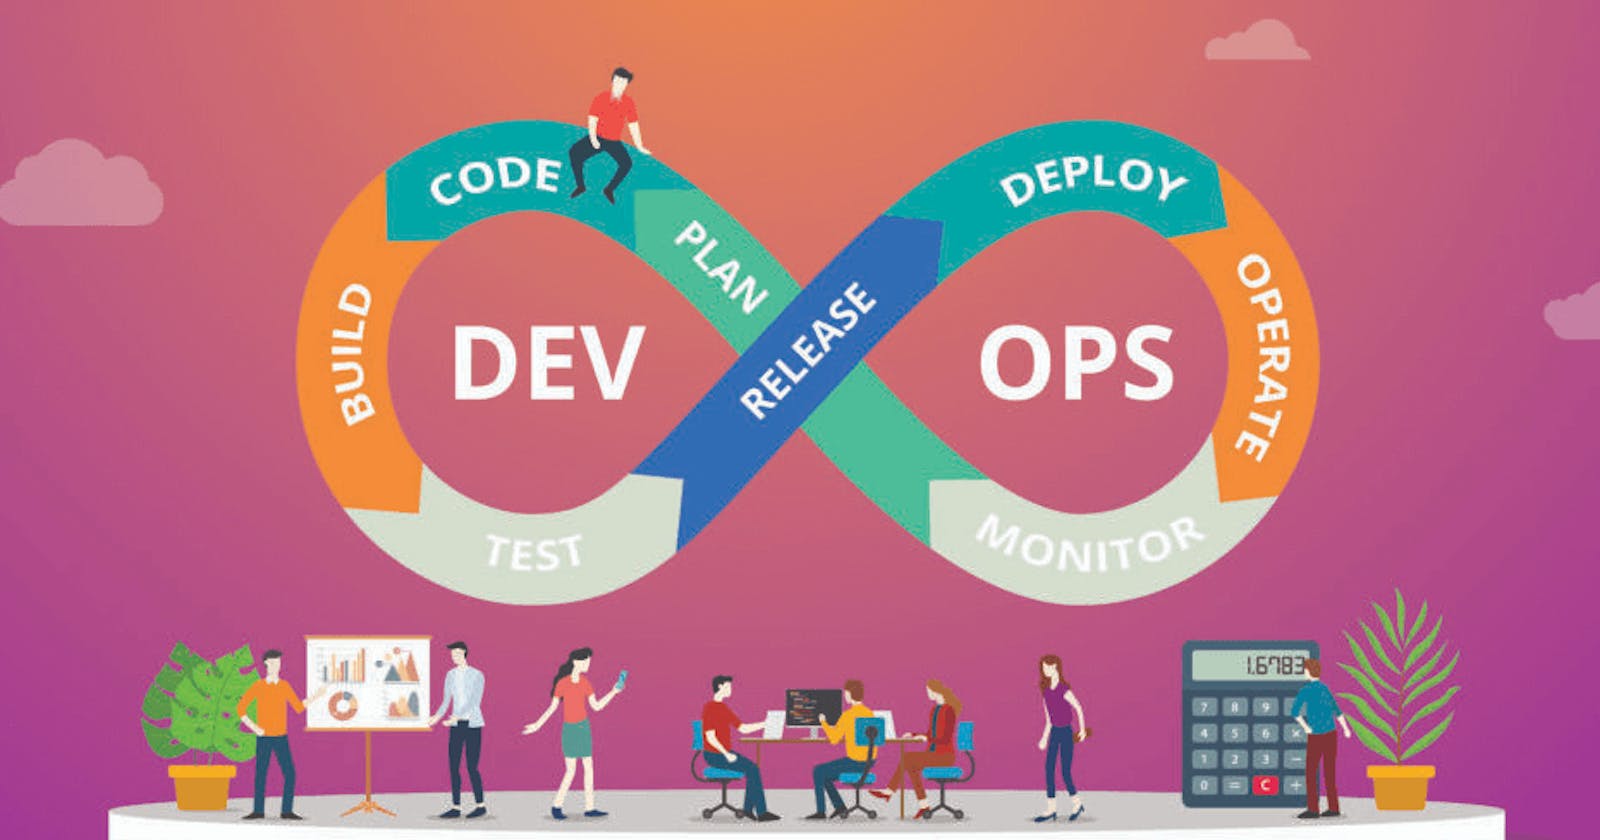 Are you starting your DevOps journey? then know these basics of DevOps